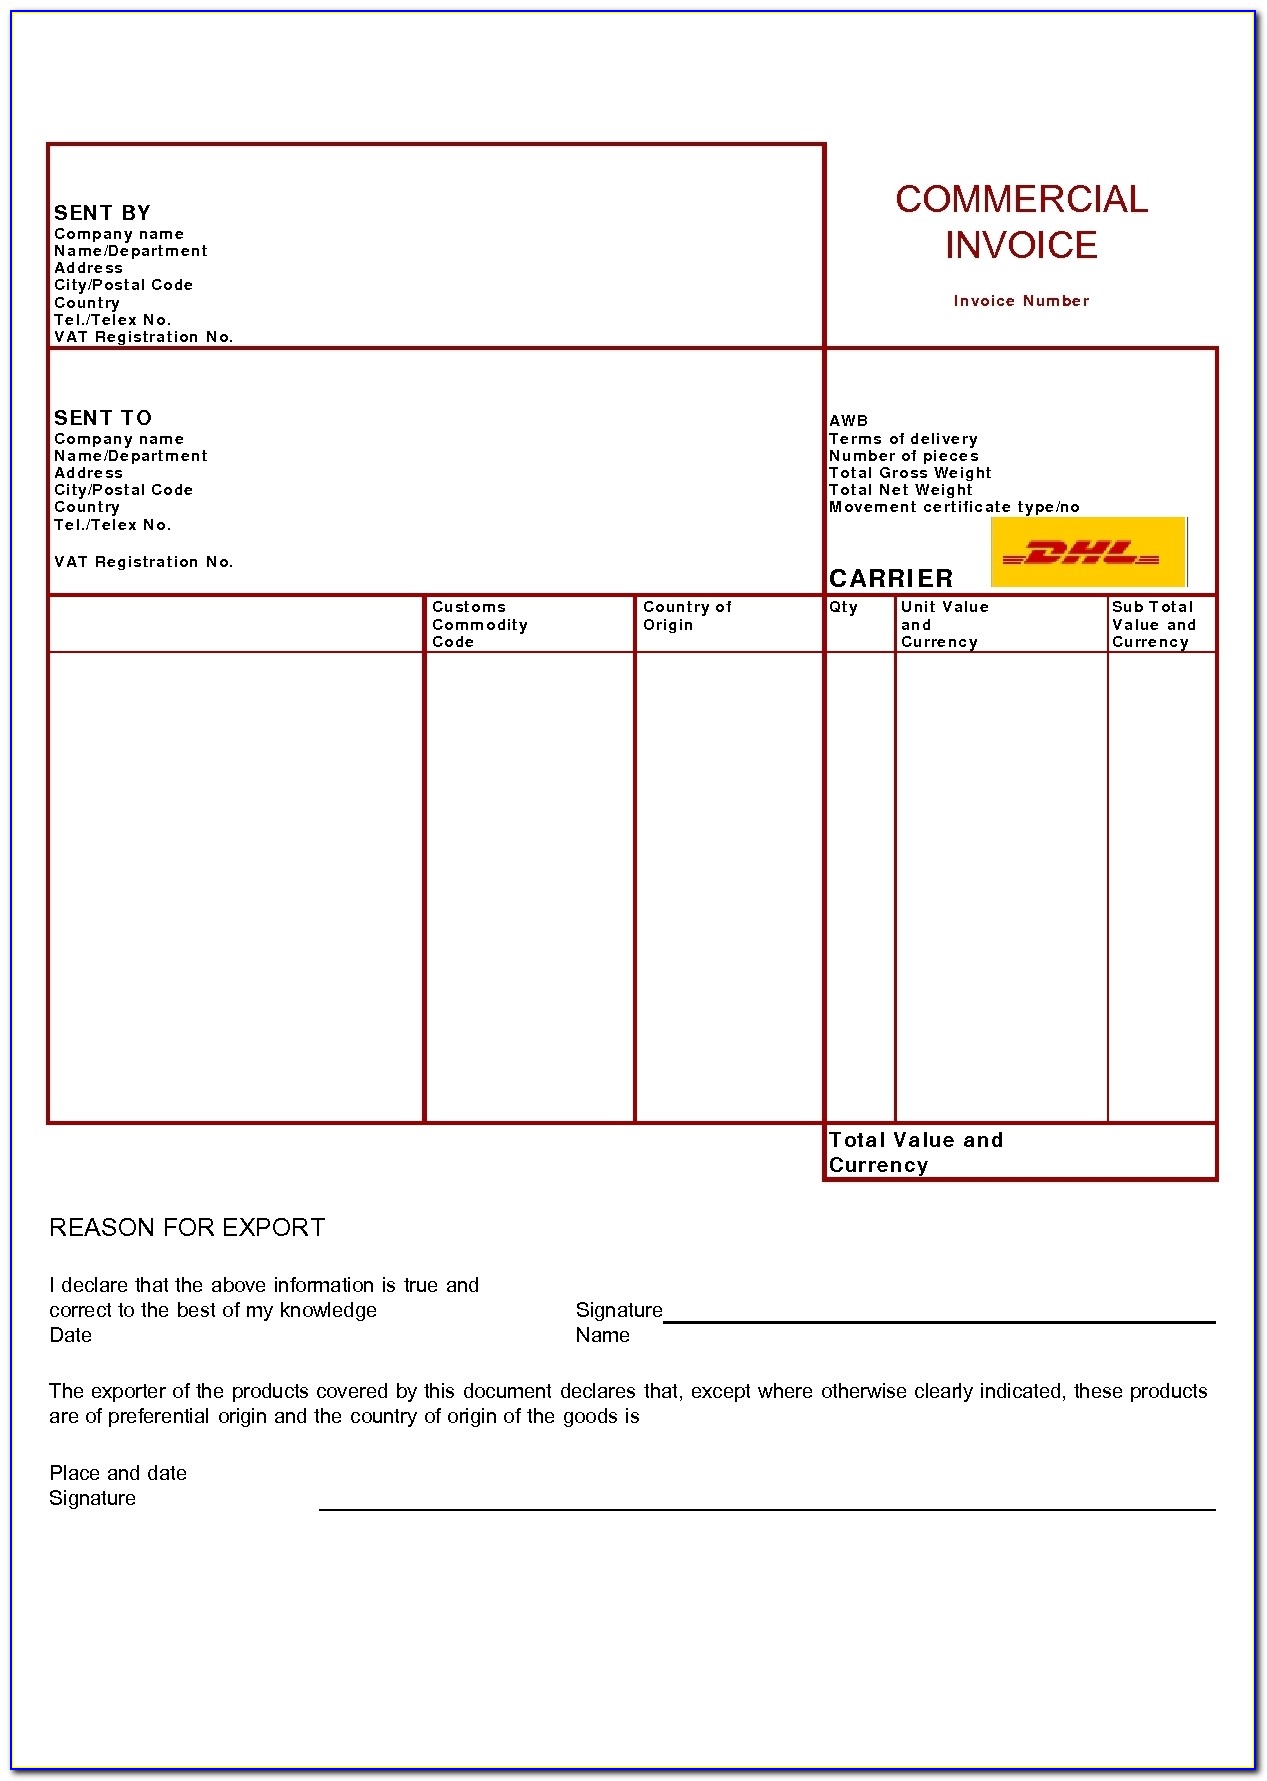 Dhl Canada Commercial Invoice Pdf